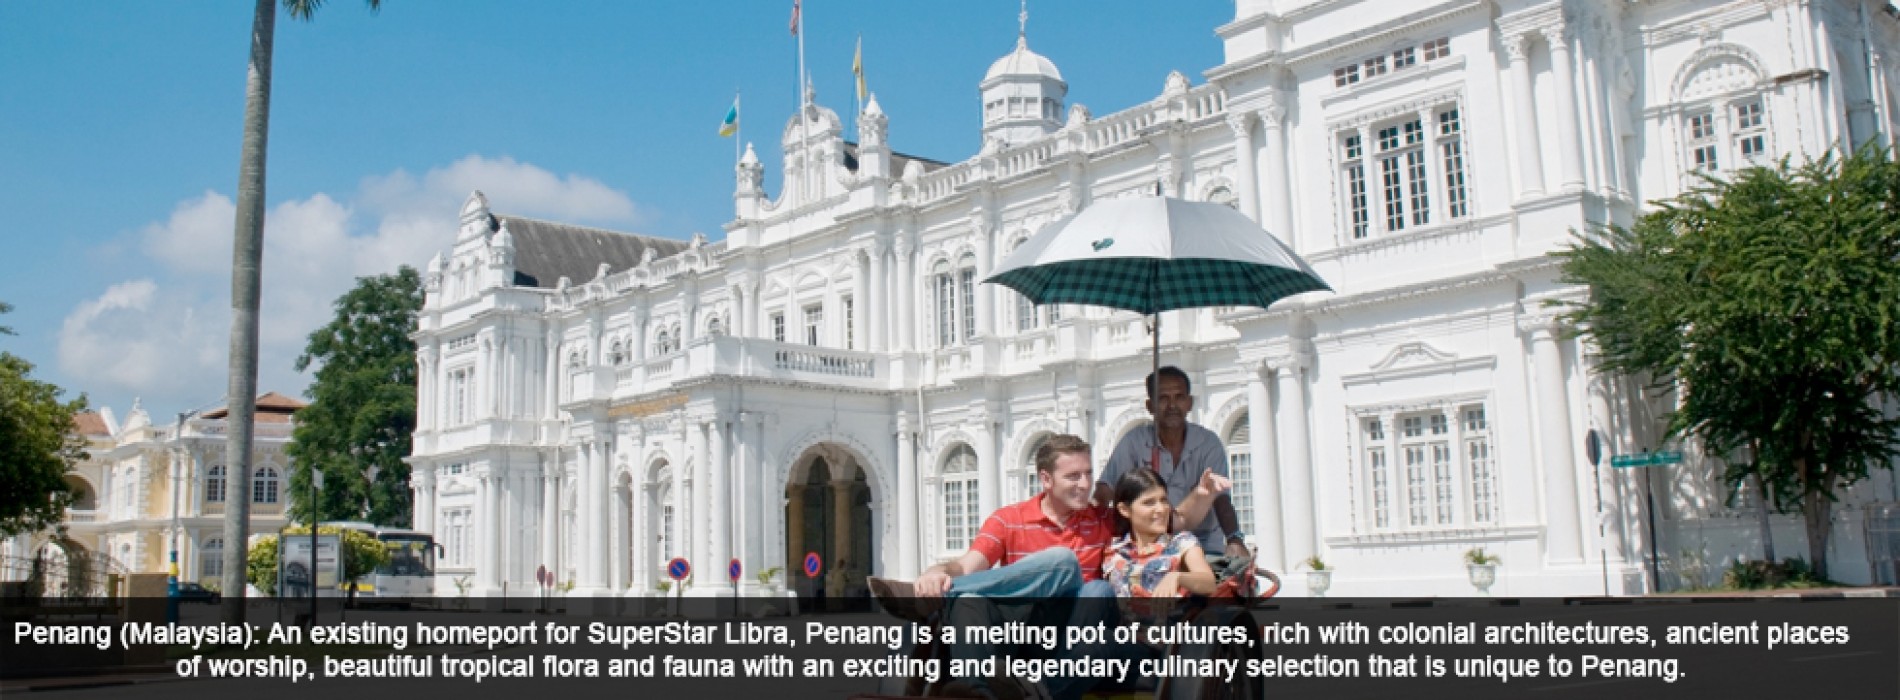 Star Cruises announces SuperStar Libra’s New Triple Homeports in Kuala Lumpur, Penang and Phuket from September